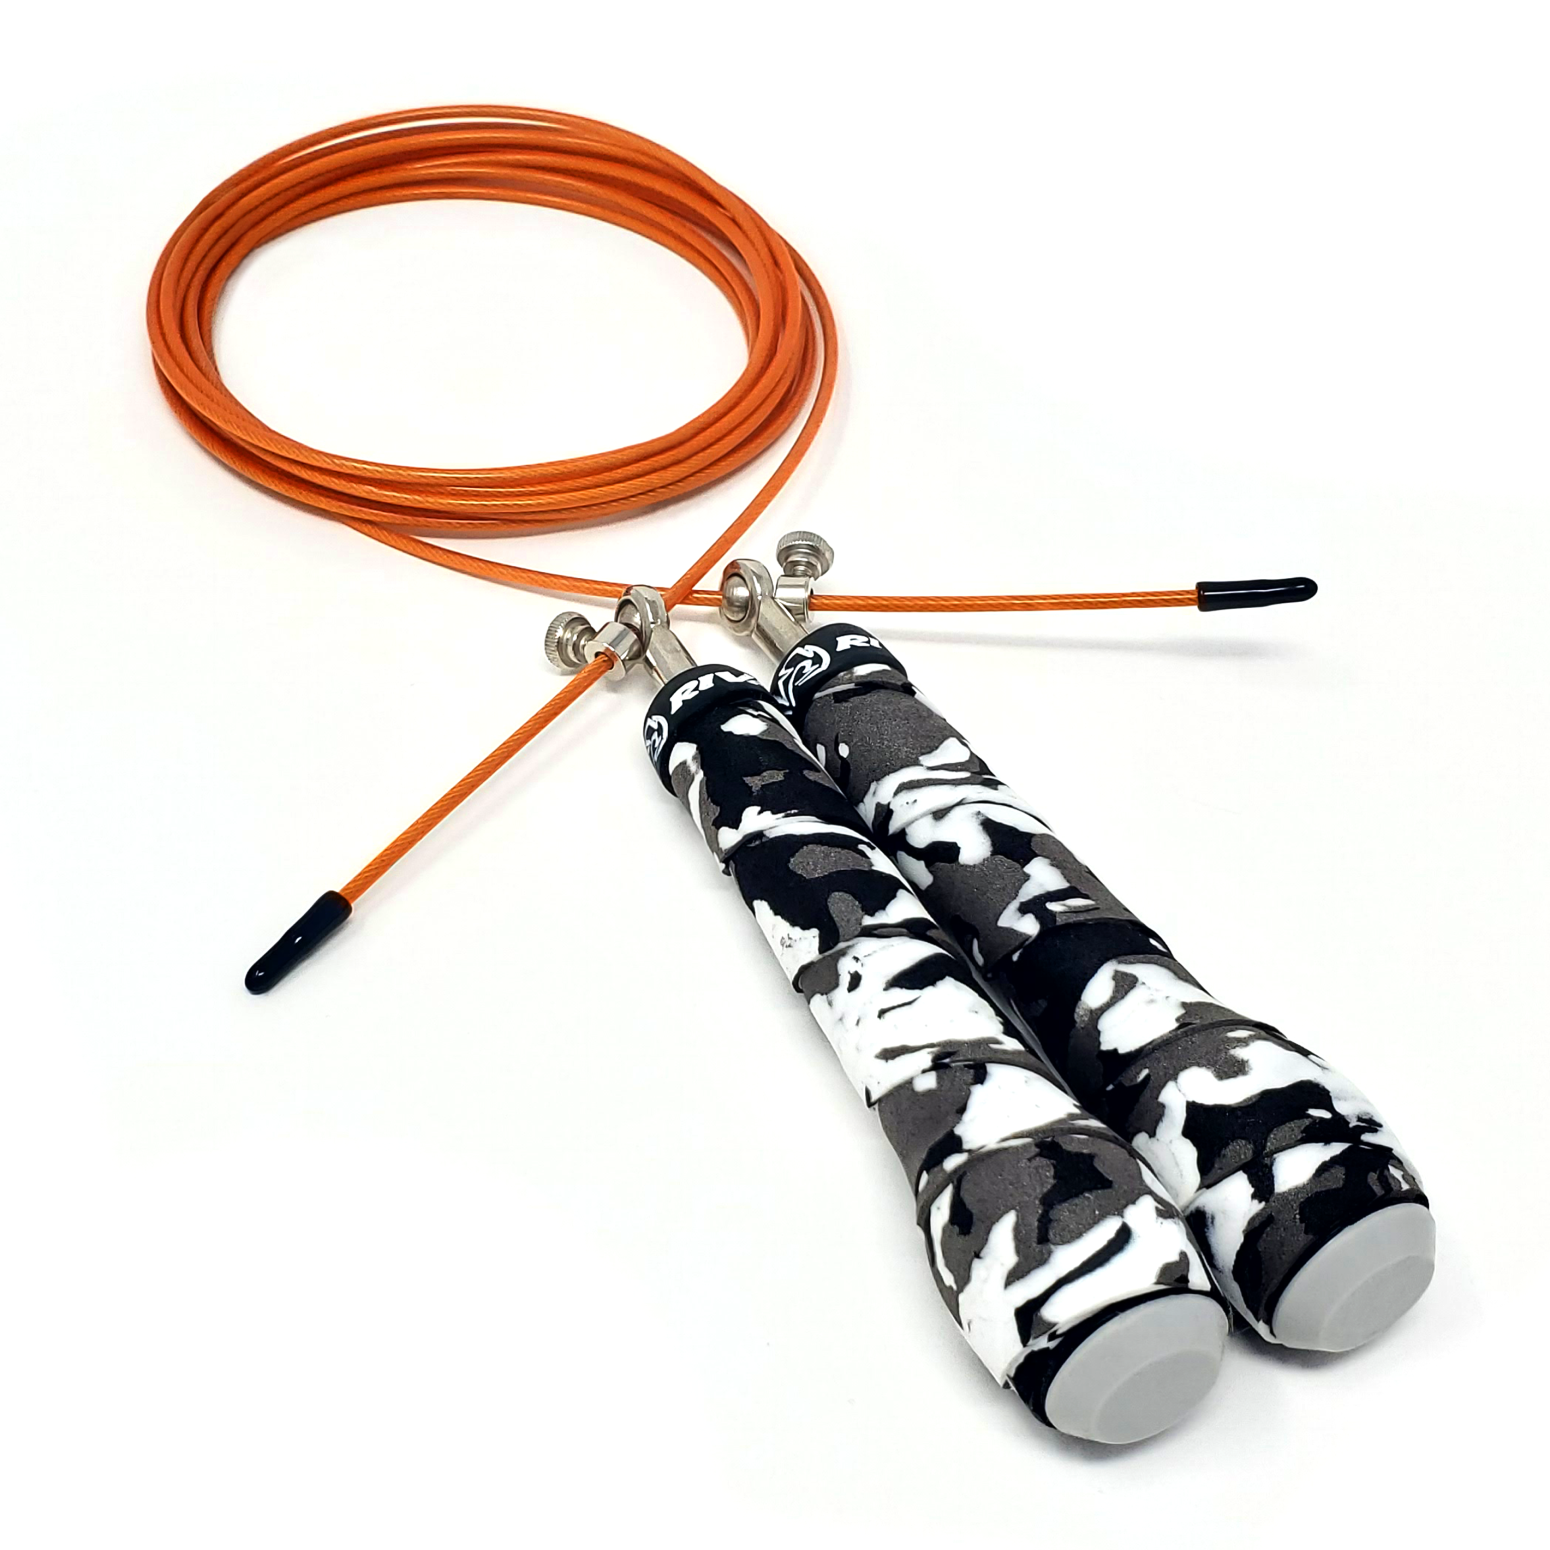 Rival Boxing Cyclone Speed Jump Rope - Click Image to Close